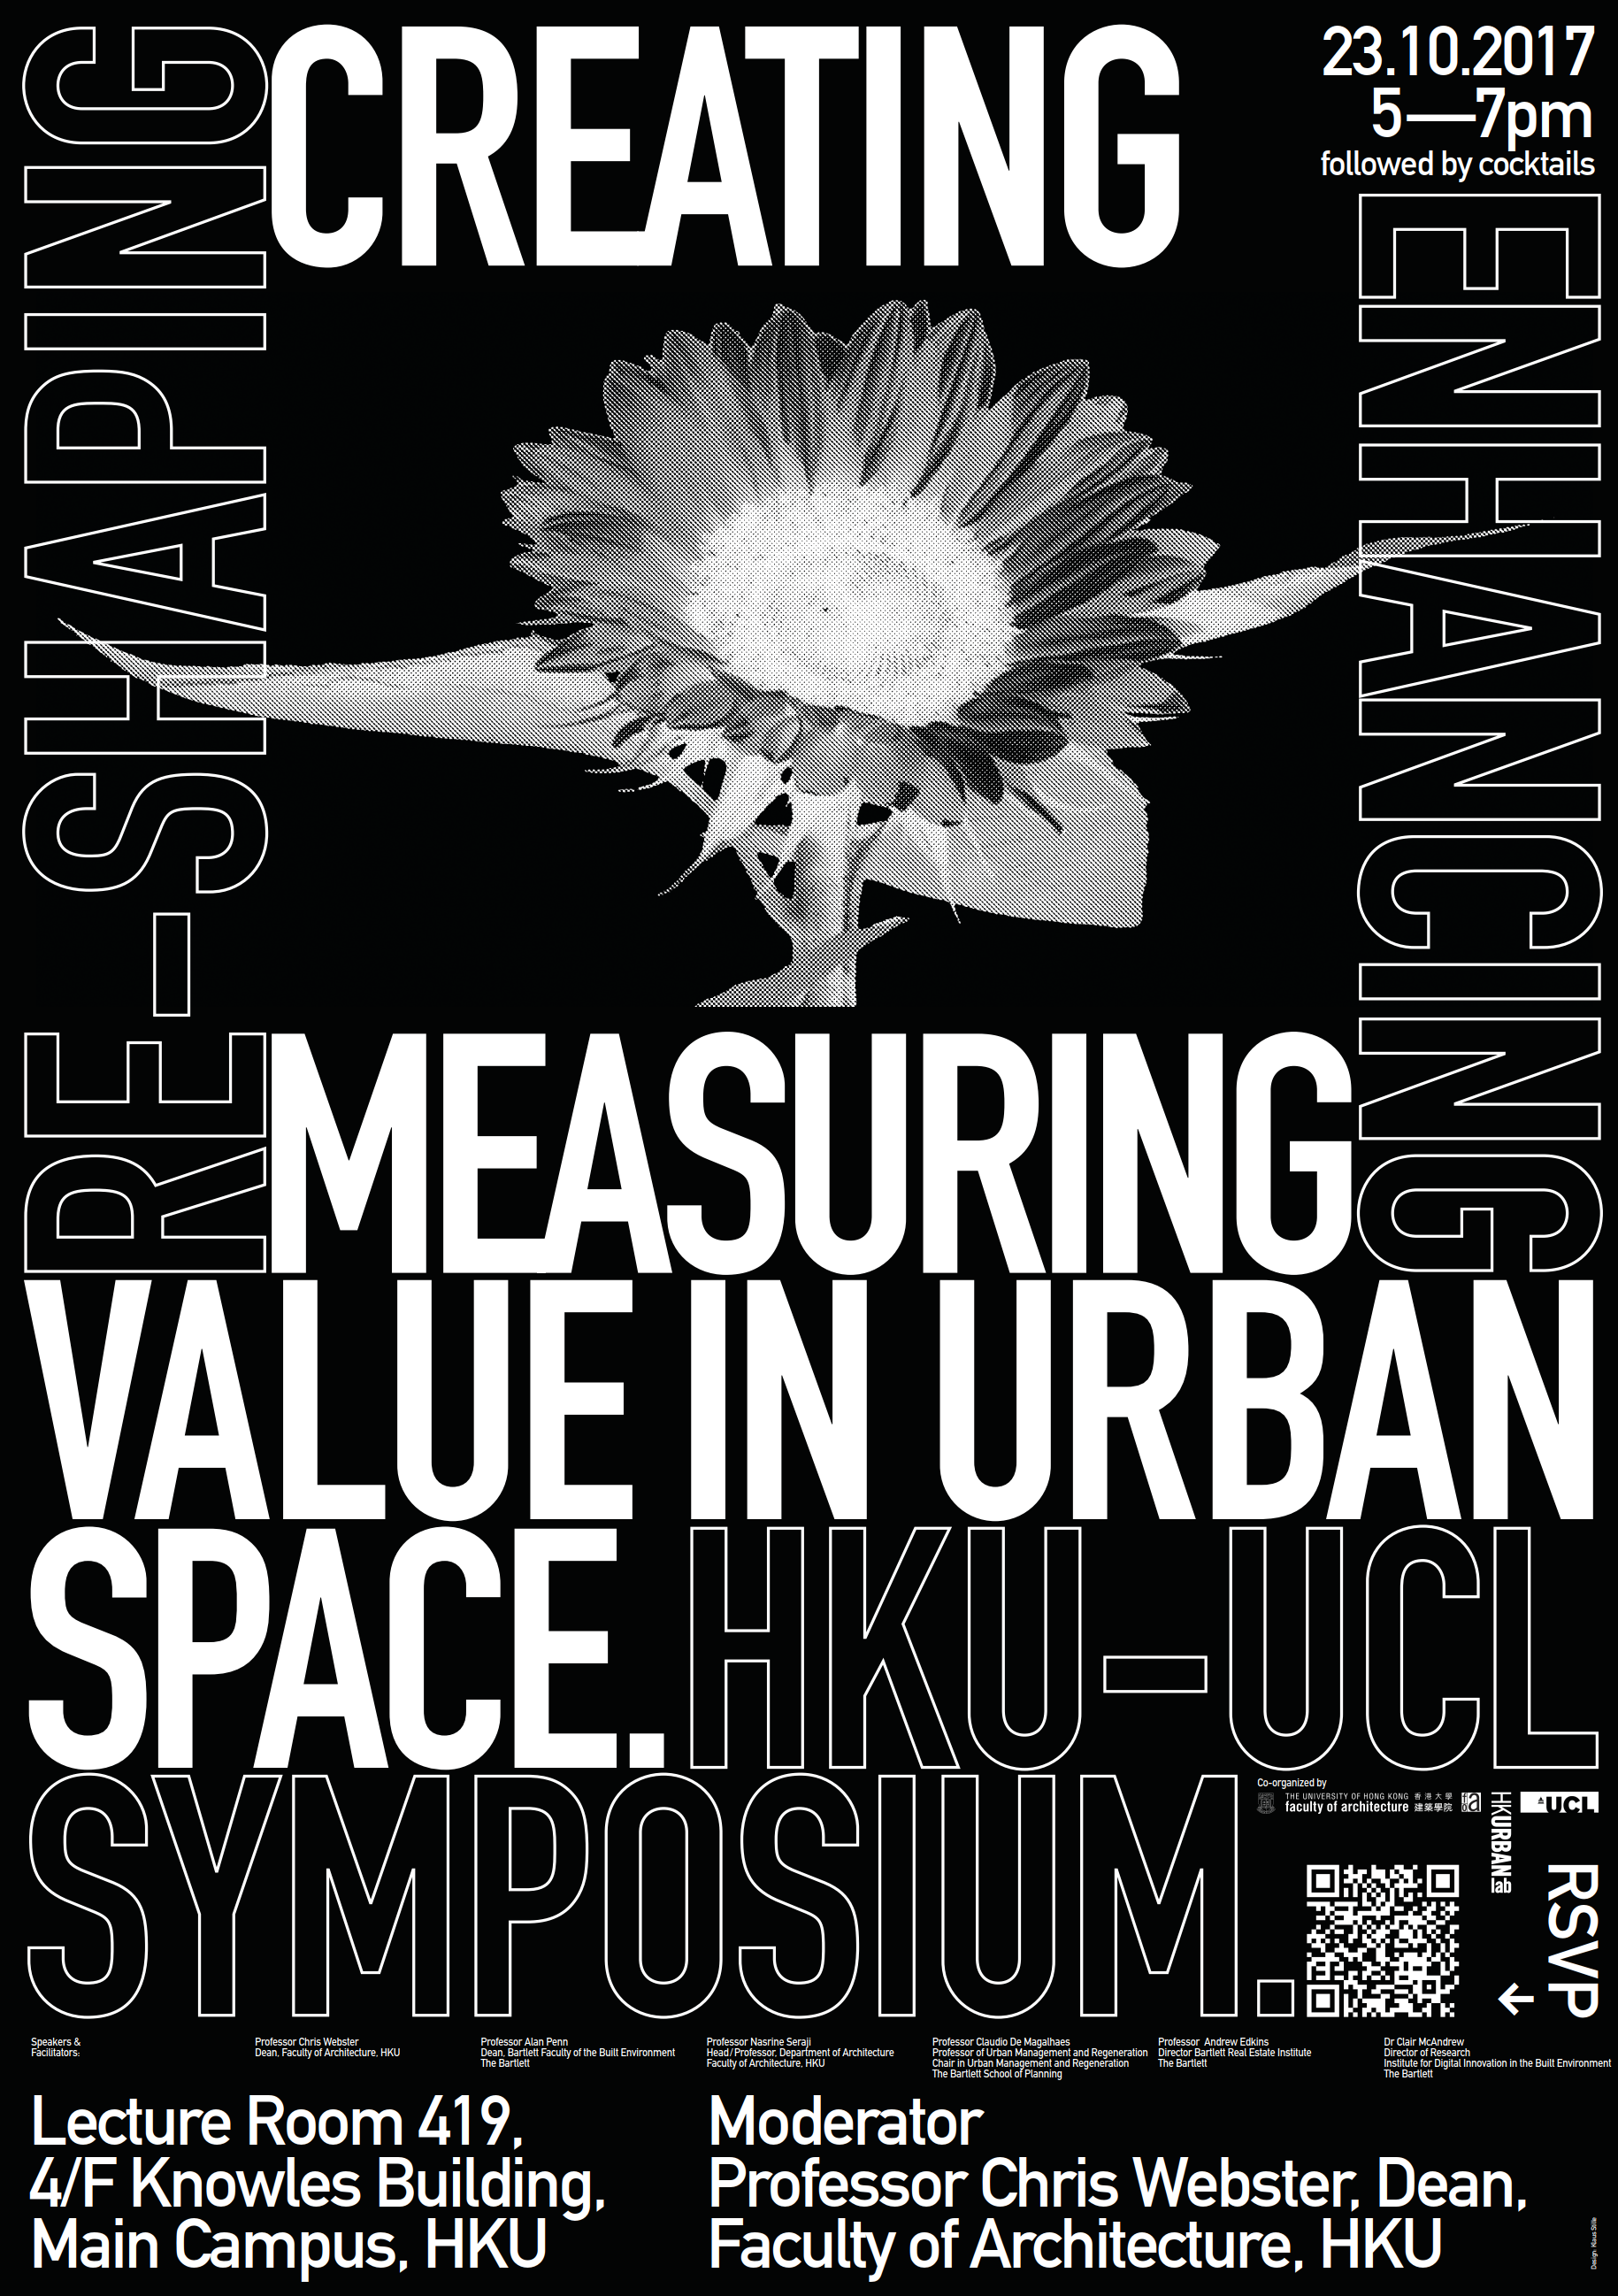 HKU-UCL Symposium - Creating, Re-shaping, Enhancing and Measuring Value in Urban Space